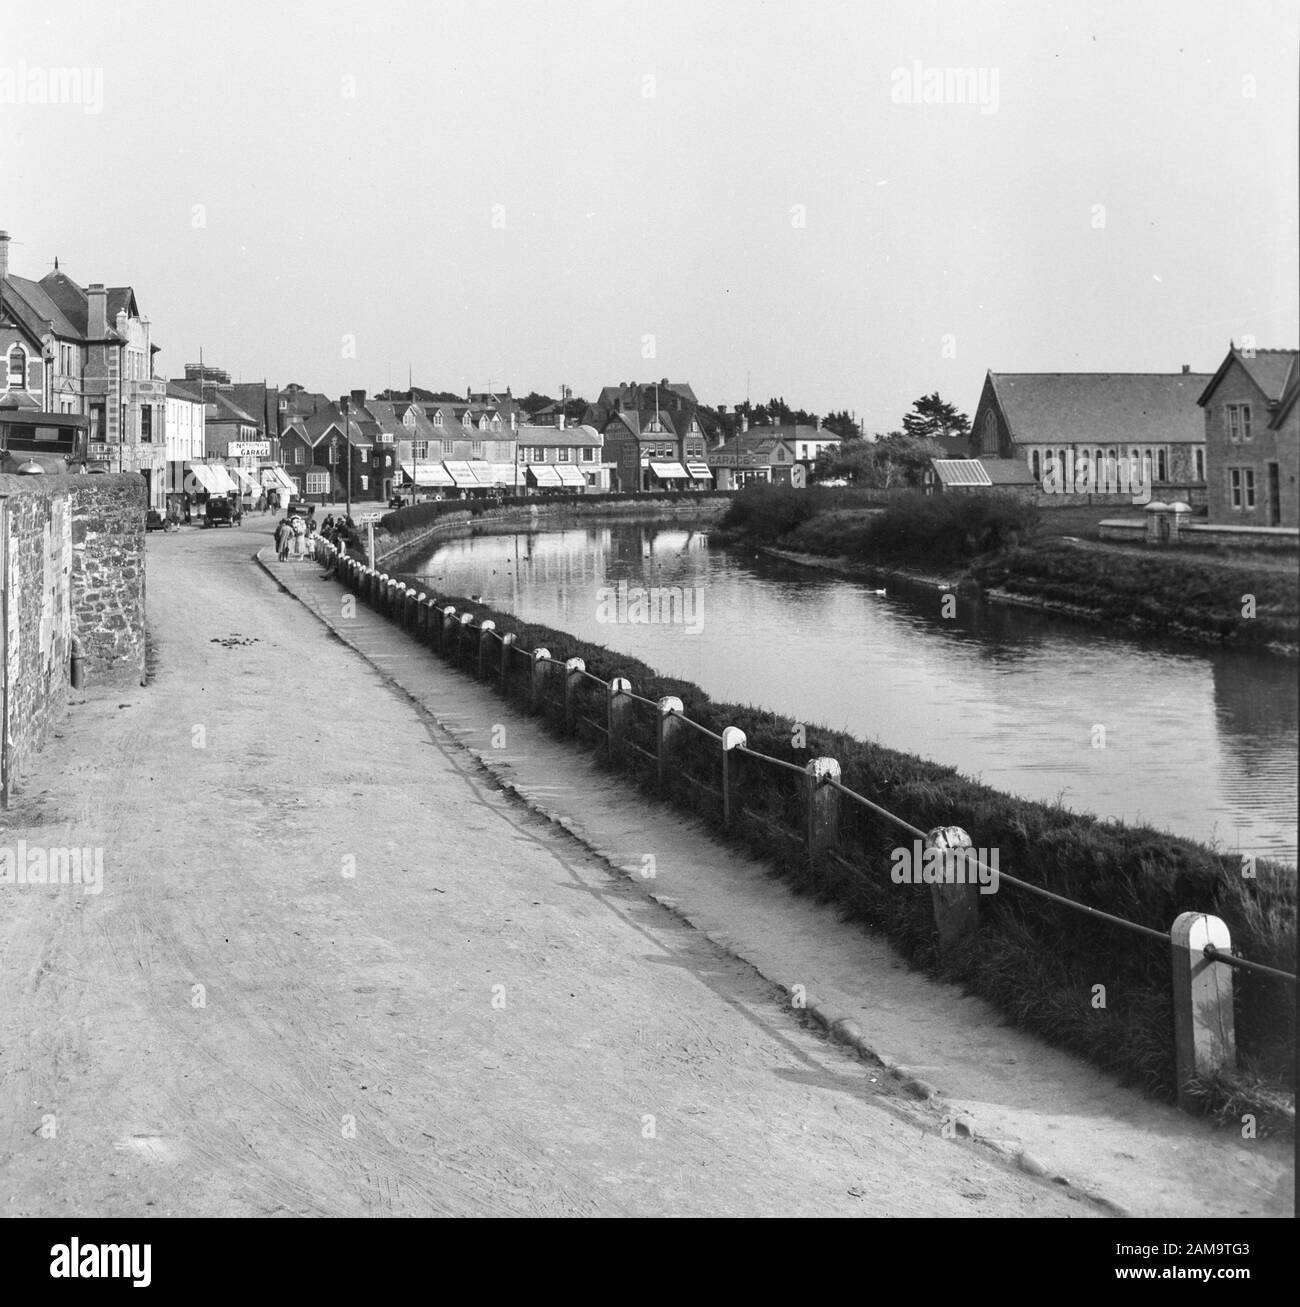 Archive image circa 1920 of Bude, Cornwall, showing Summerleaze Crescent, River Strat or Next. Scanned from the original negative. Stock Photo